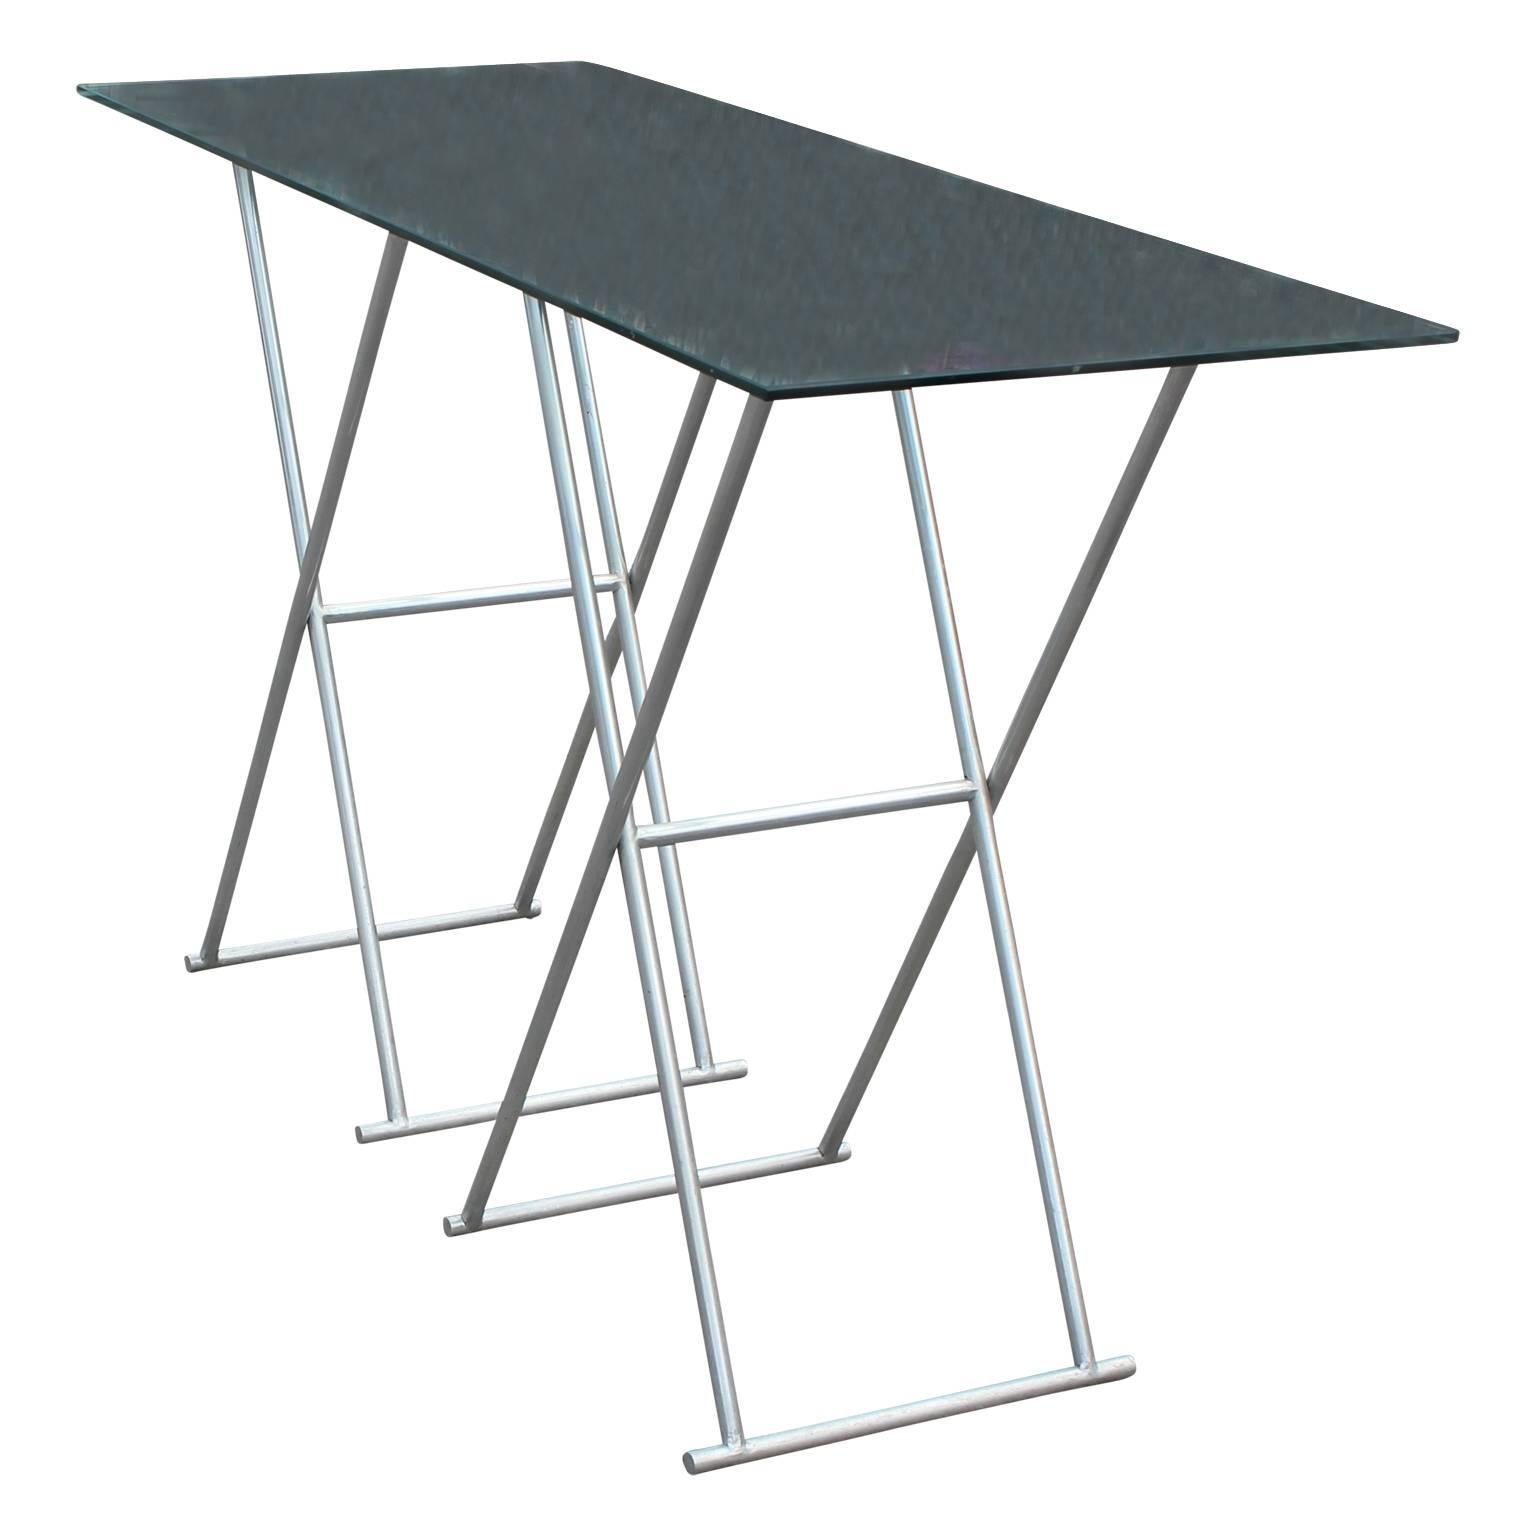 Custom aluminum folding console table with leather straps. Chrome and leather strapped pedestals can be adjusted to suit your desired length. Measure: Length of the glass top is 54 inches.